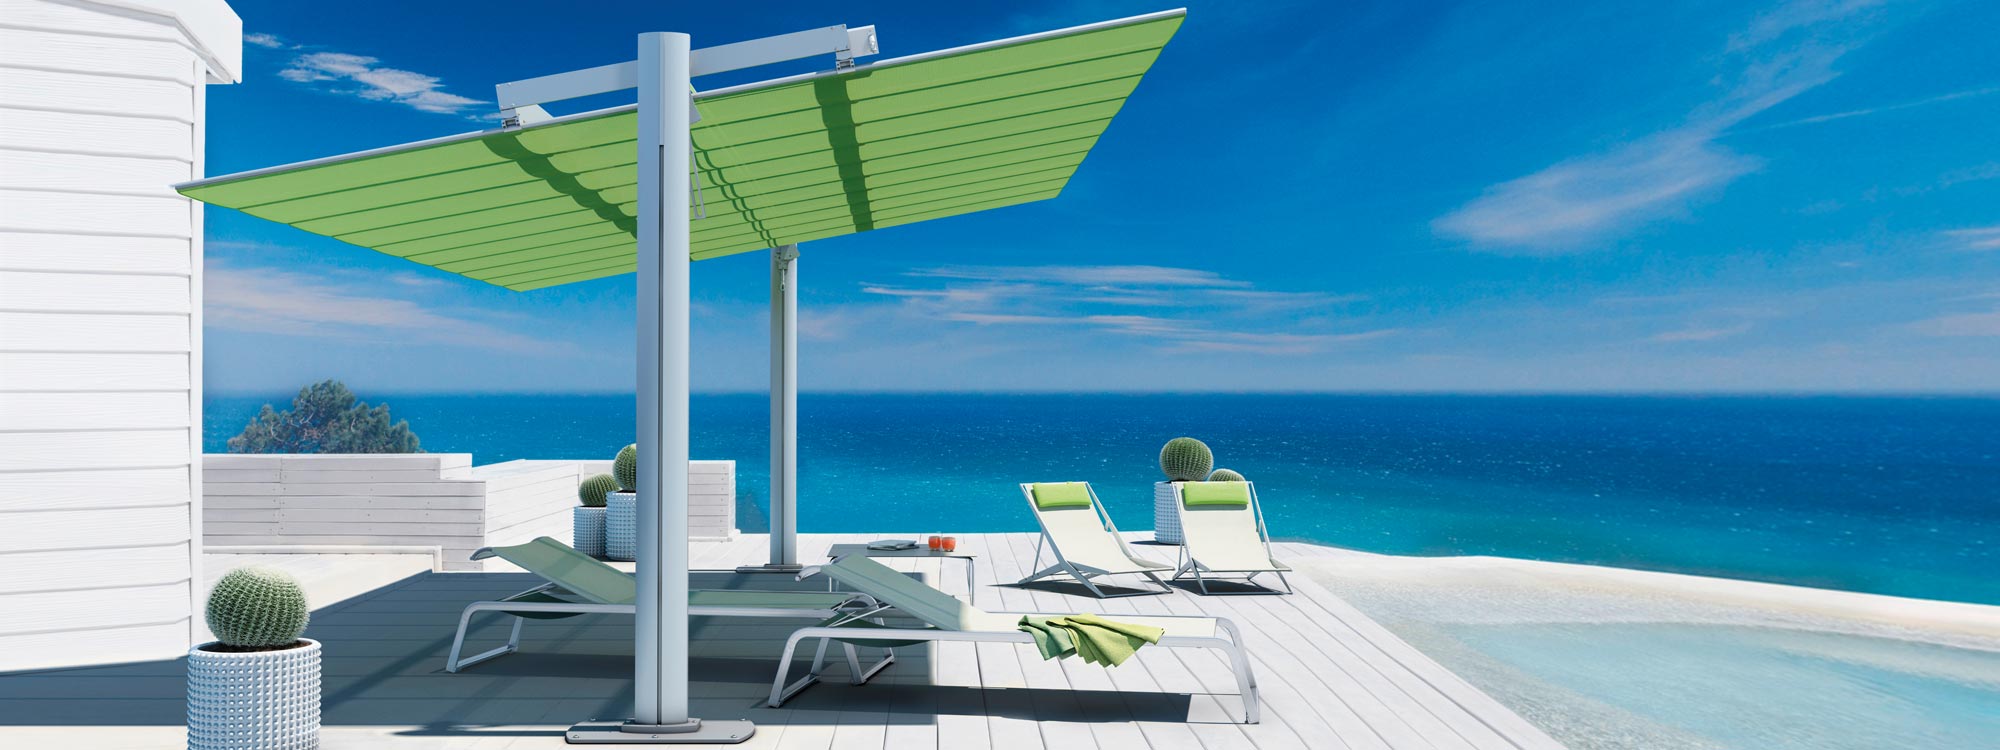 Image of Flexy Large freestanding sun shade over Coro L3 loungers and Boomy chairs on sunny terrace with azure sea in background